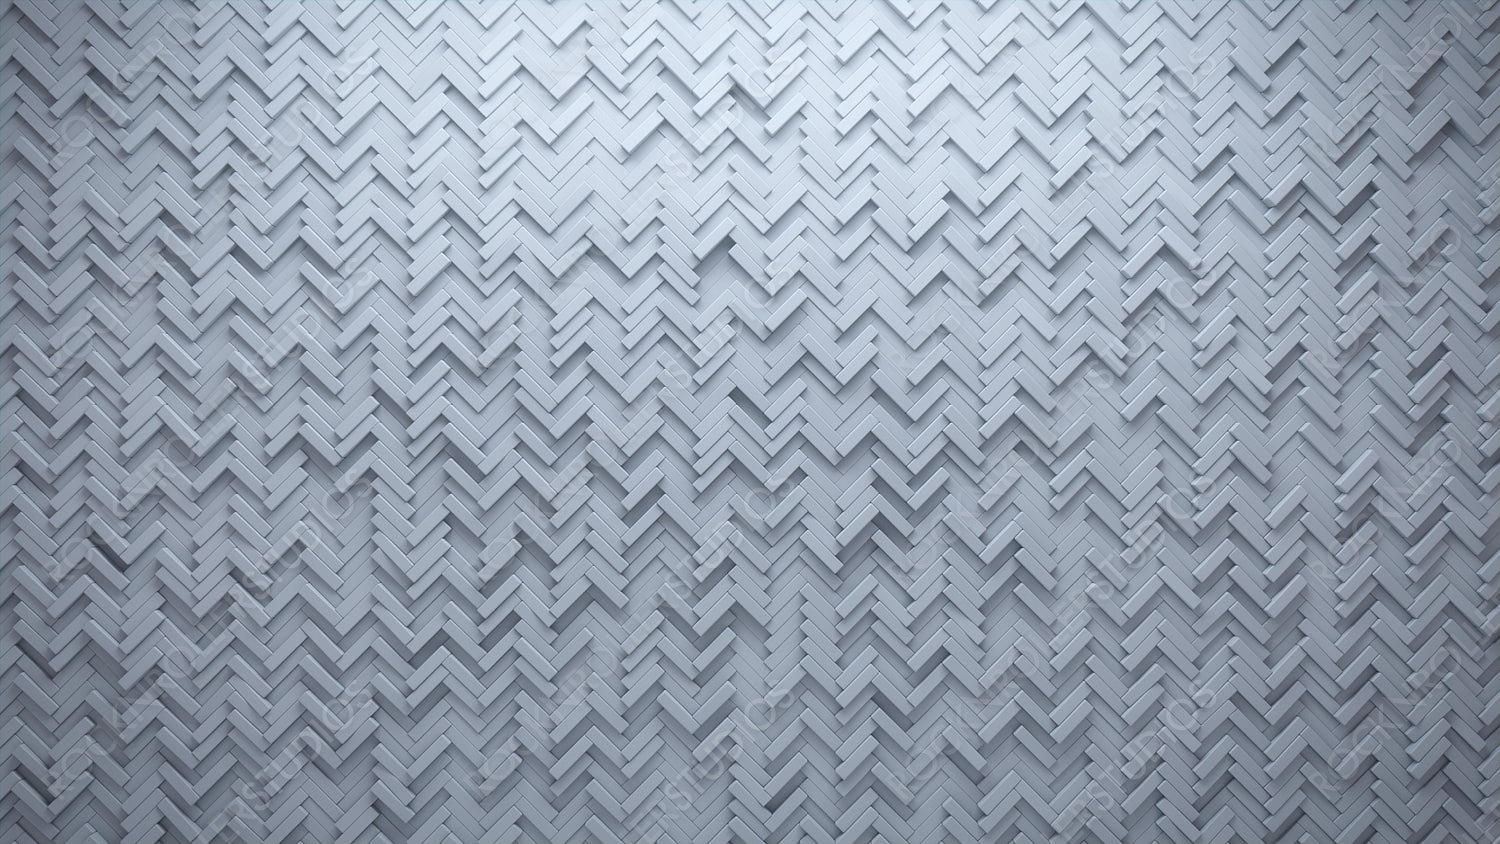 3D, Herringbone Mosaic Tiles arranged in the shape of a wall. Semigloss, Polished, Bricks stacked to create a White block background. 3D Render